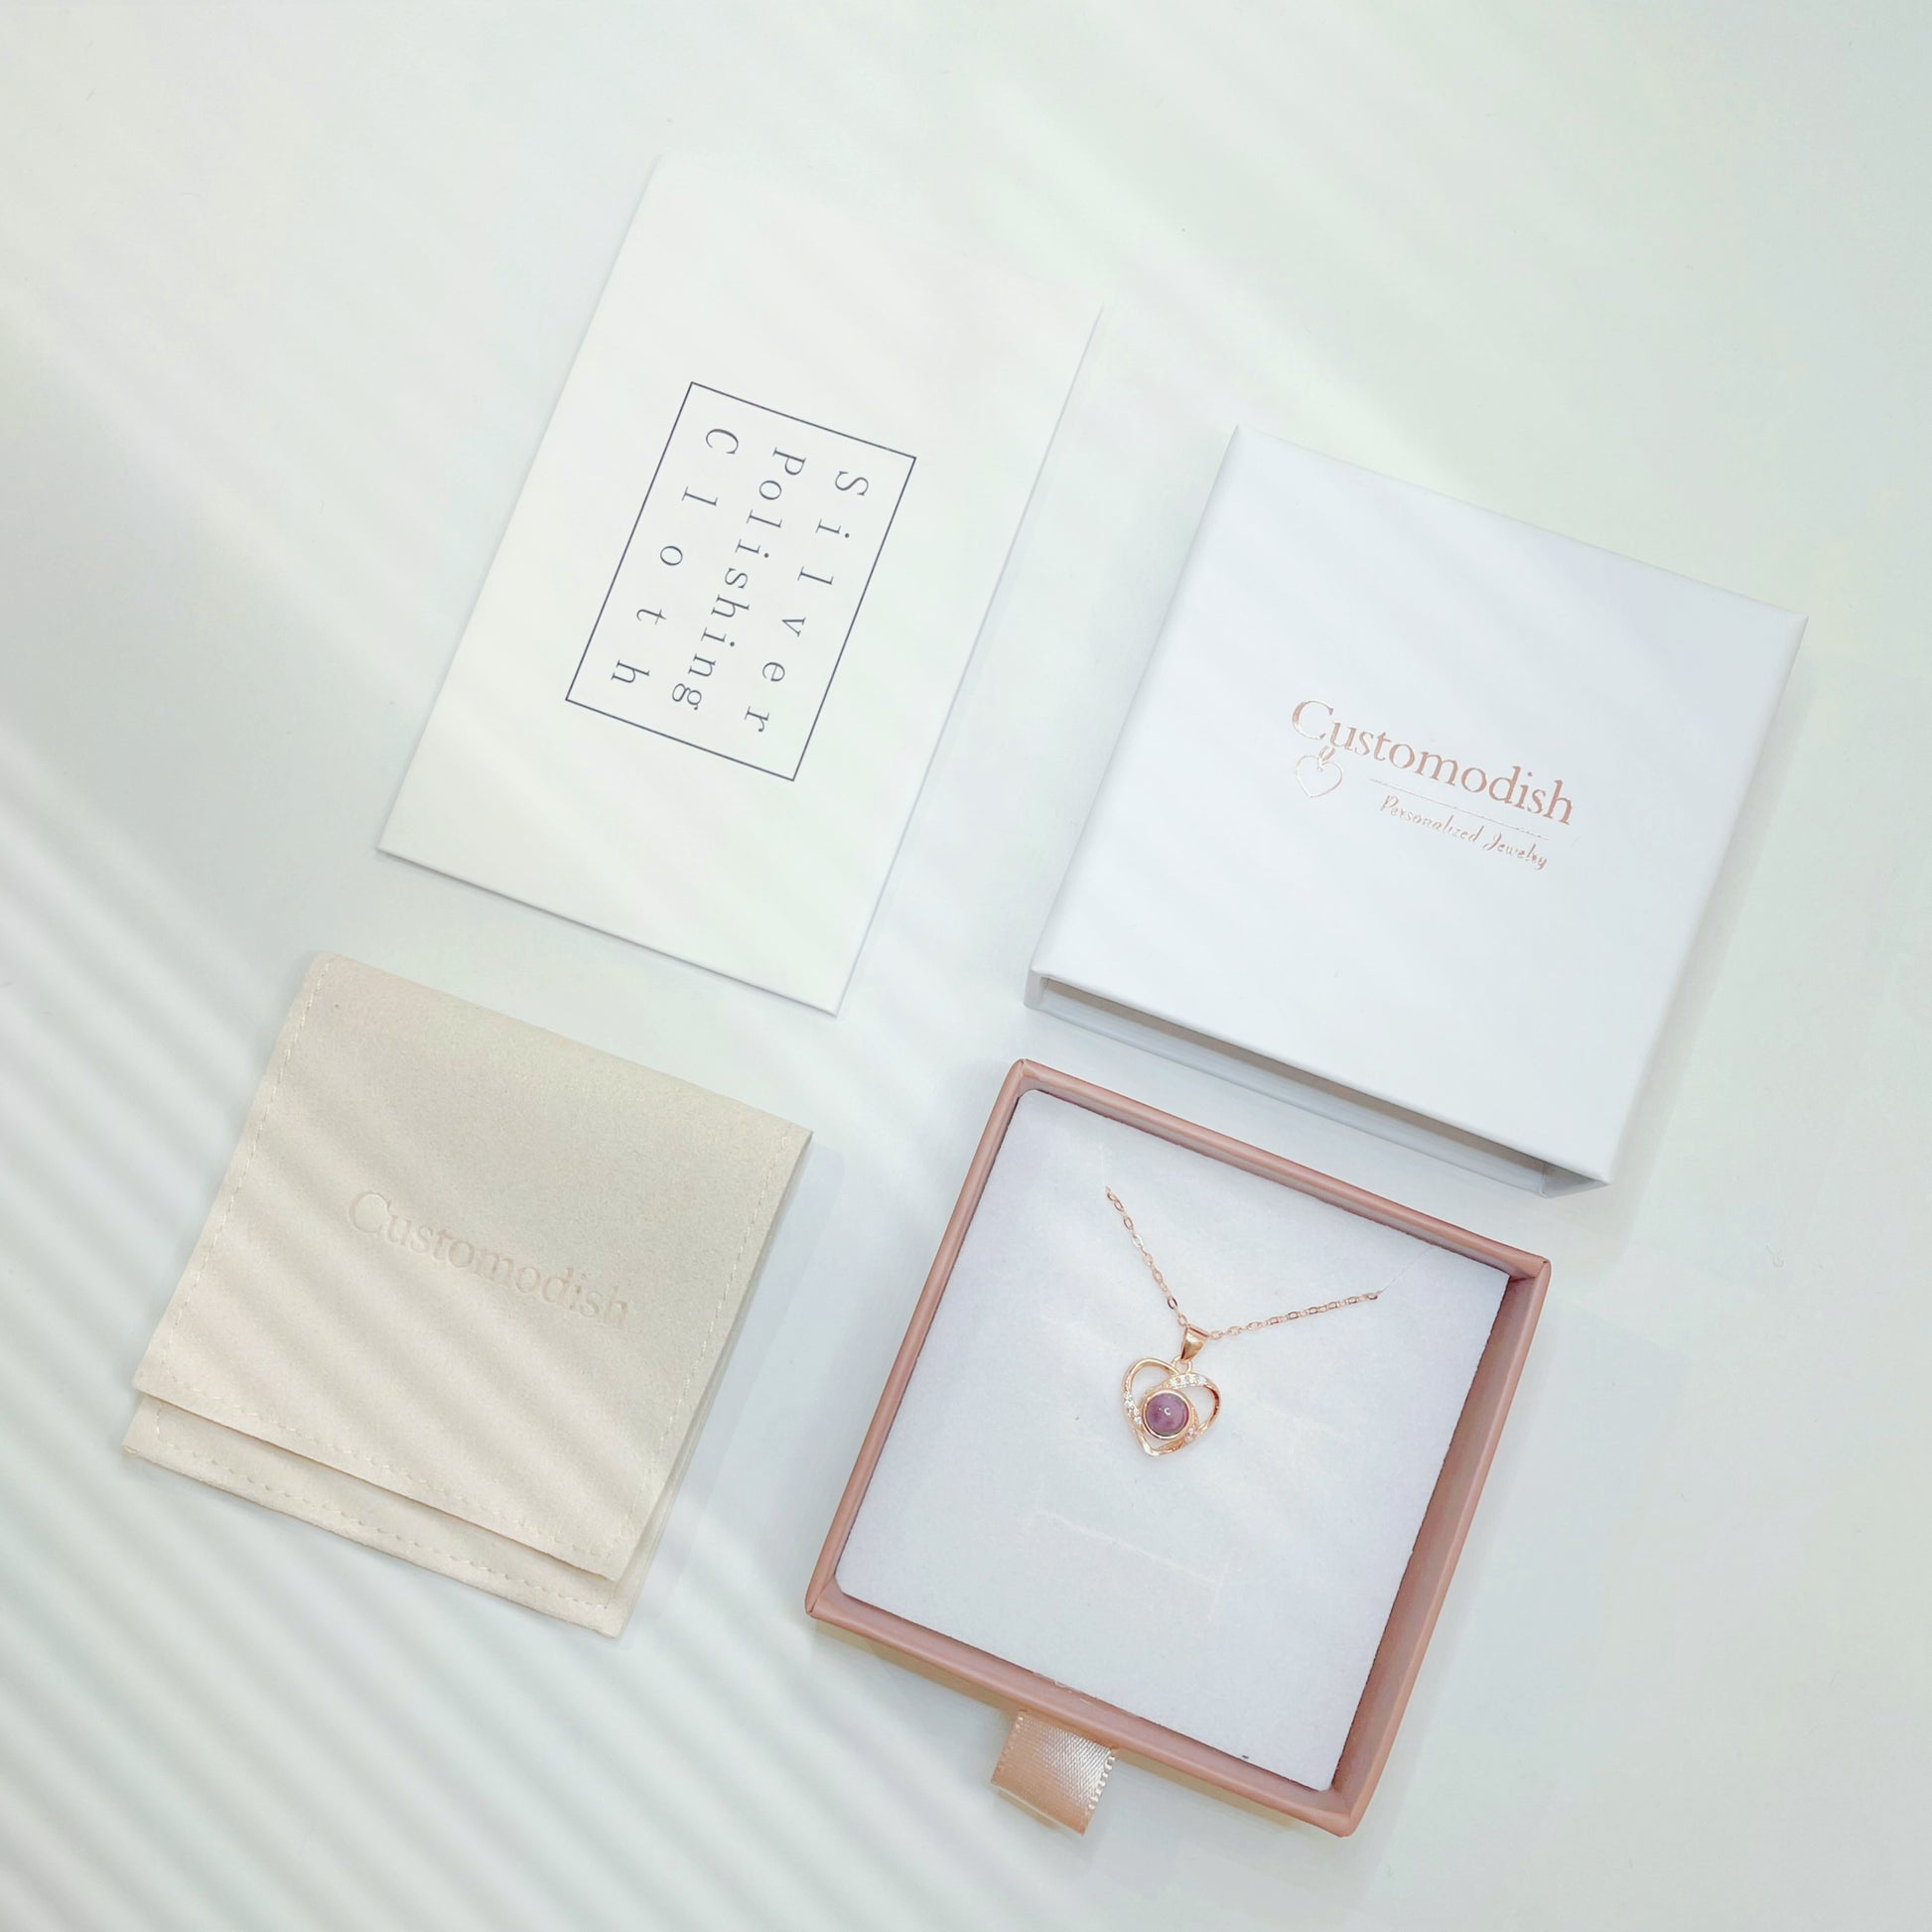 We put your projection necklace inside our cute jewelry box